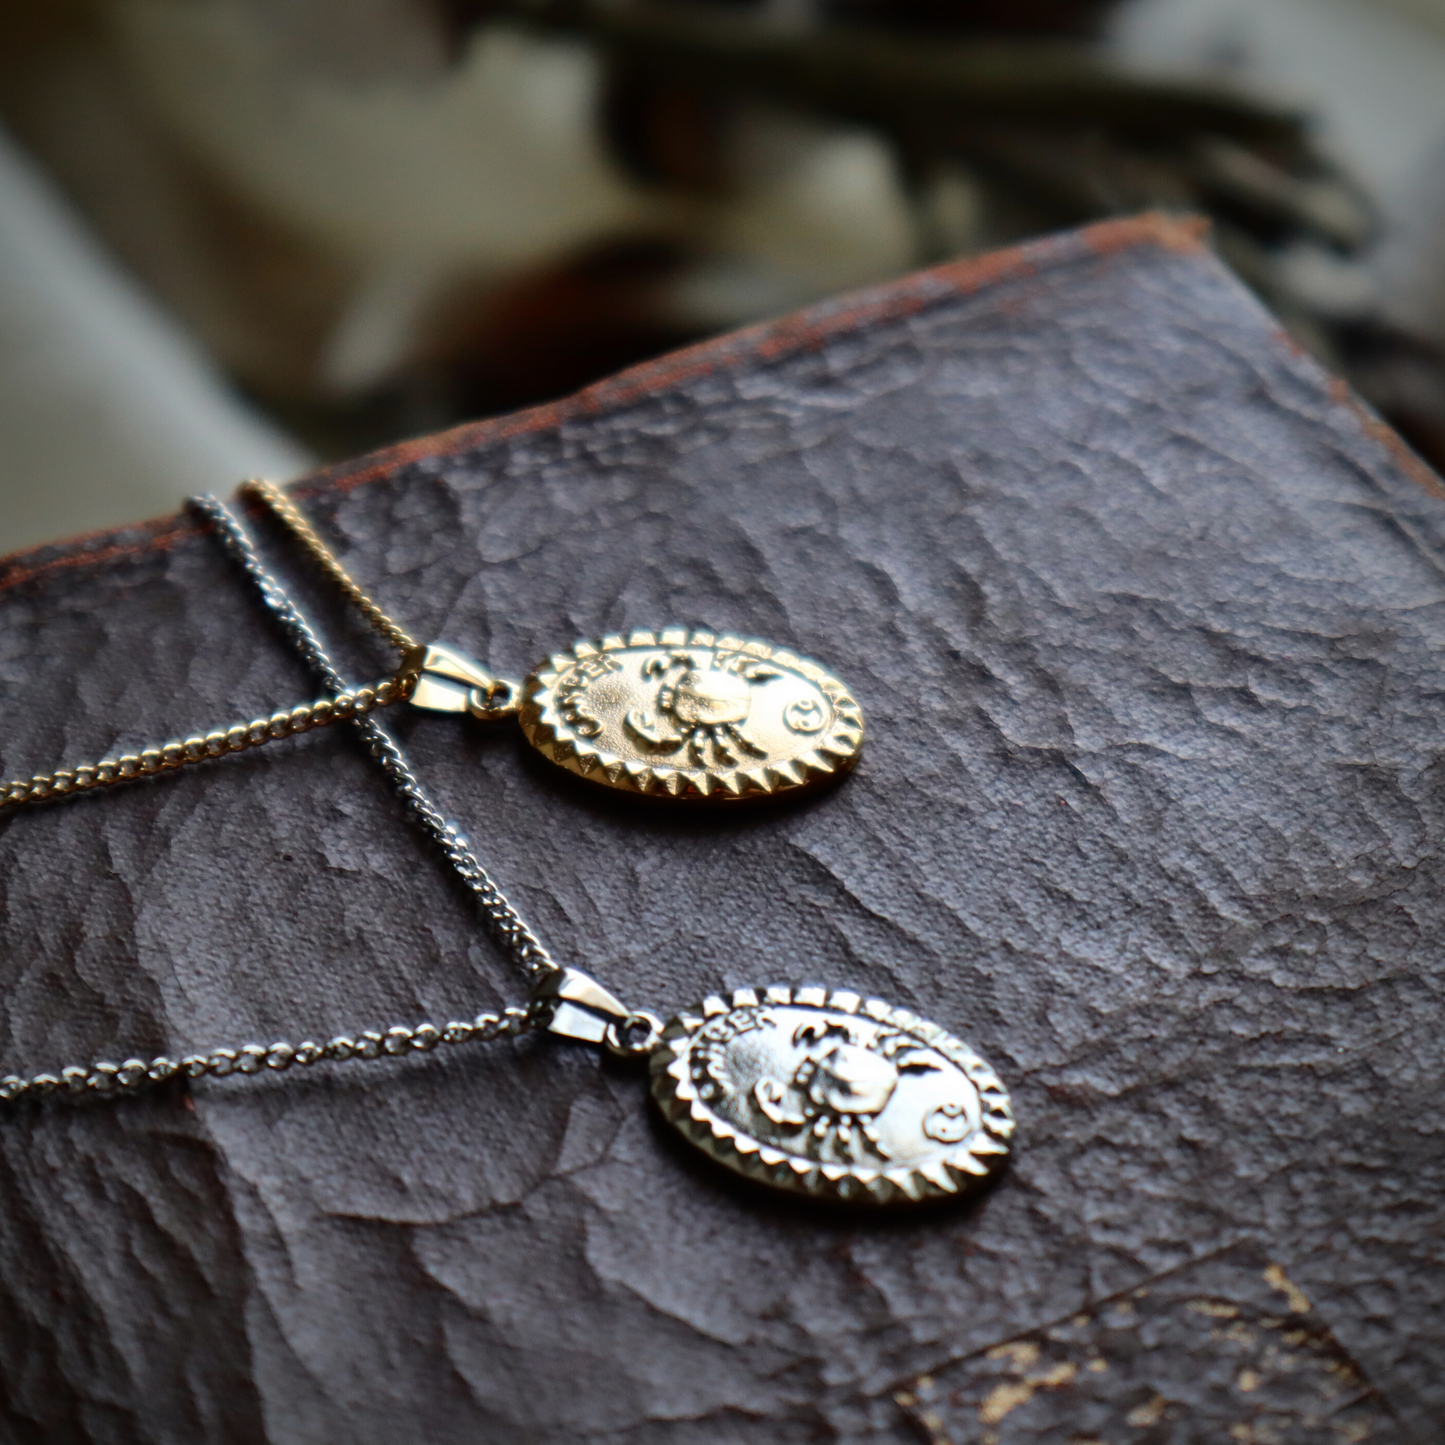 Cancer Vintage Zodiac Pendant Necklace in Gold or Silver